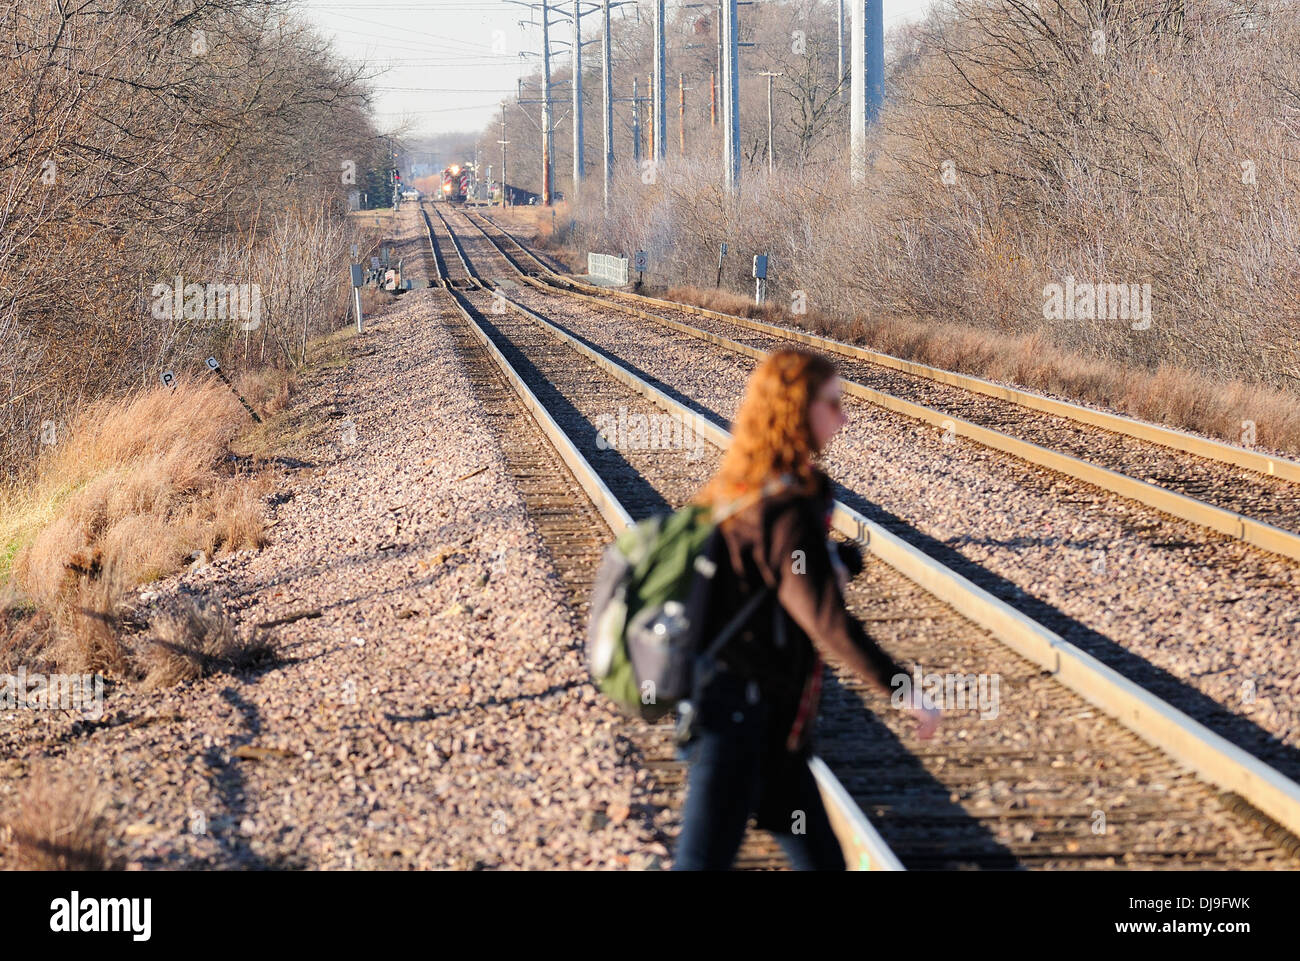 Woman crossing train tracks with approaching train. Stock Photo